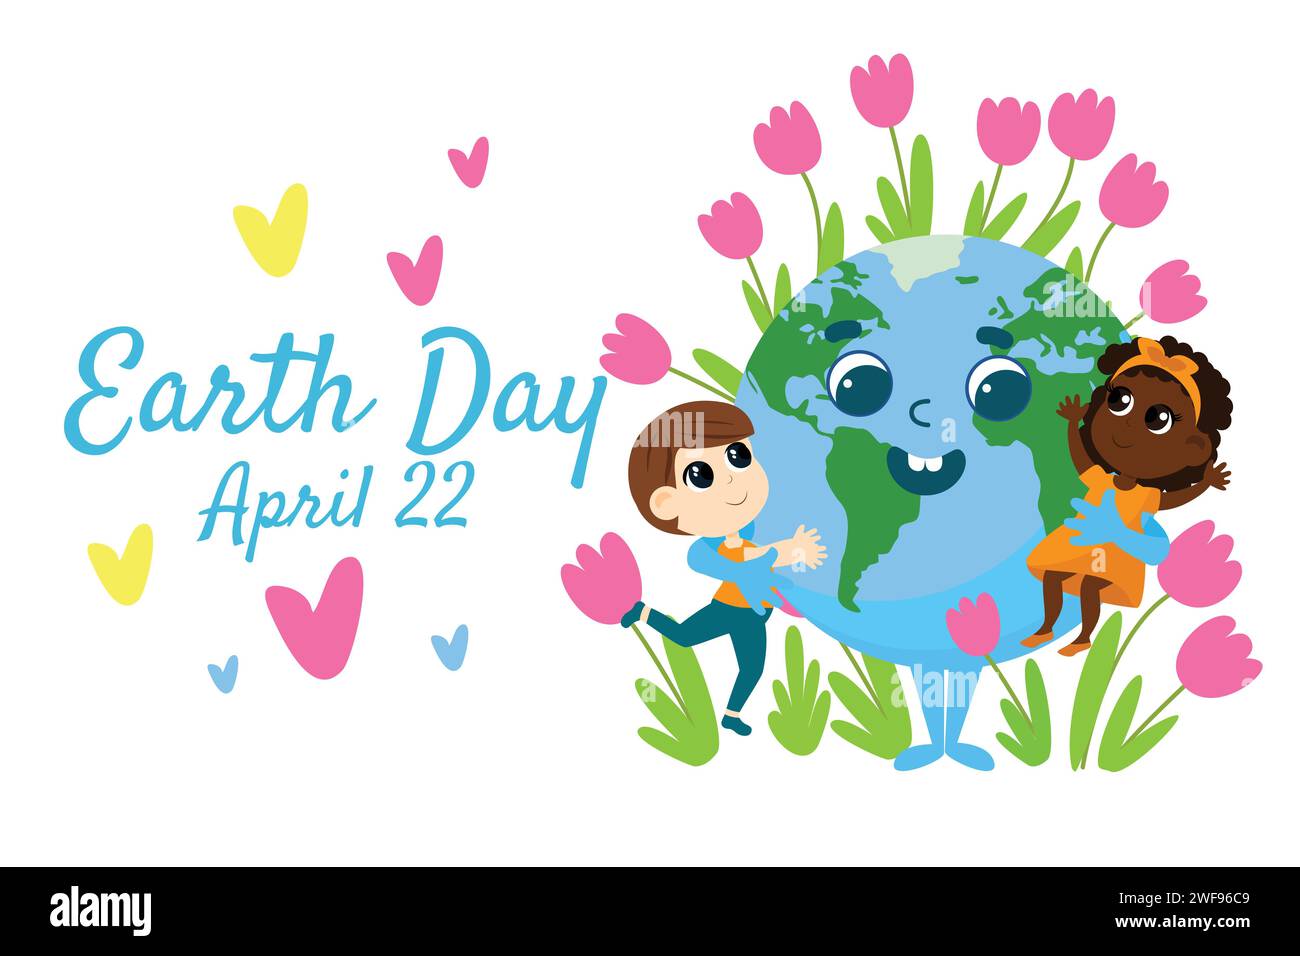 Earth Day postcard. The earth with a cheerful face embraces an international boy and girl, and from it grow plants, flowers. Stock Vector